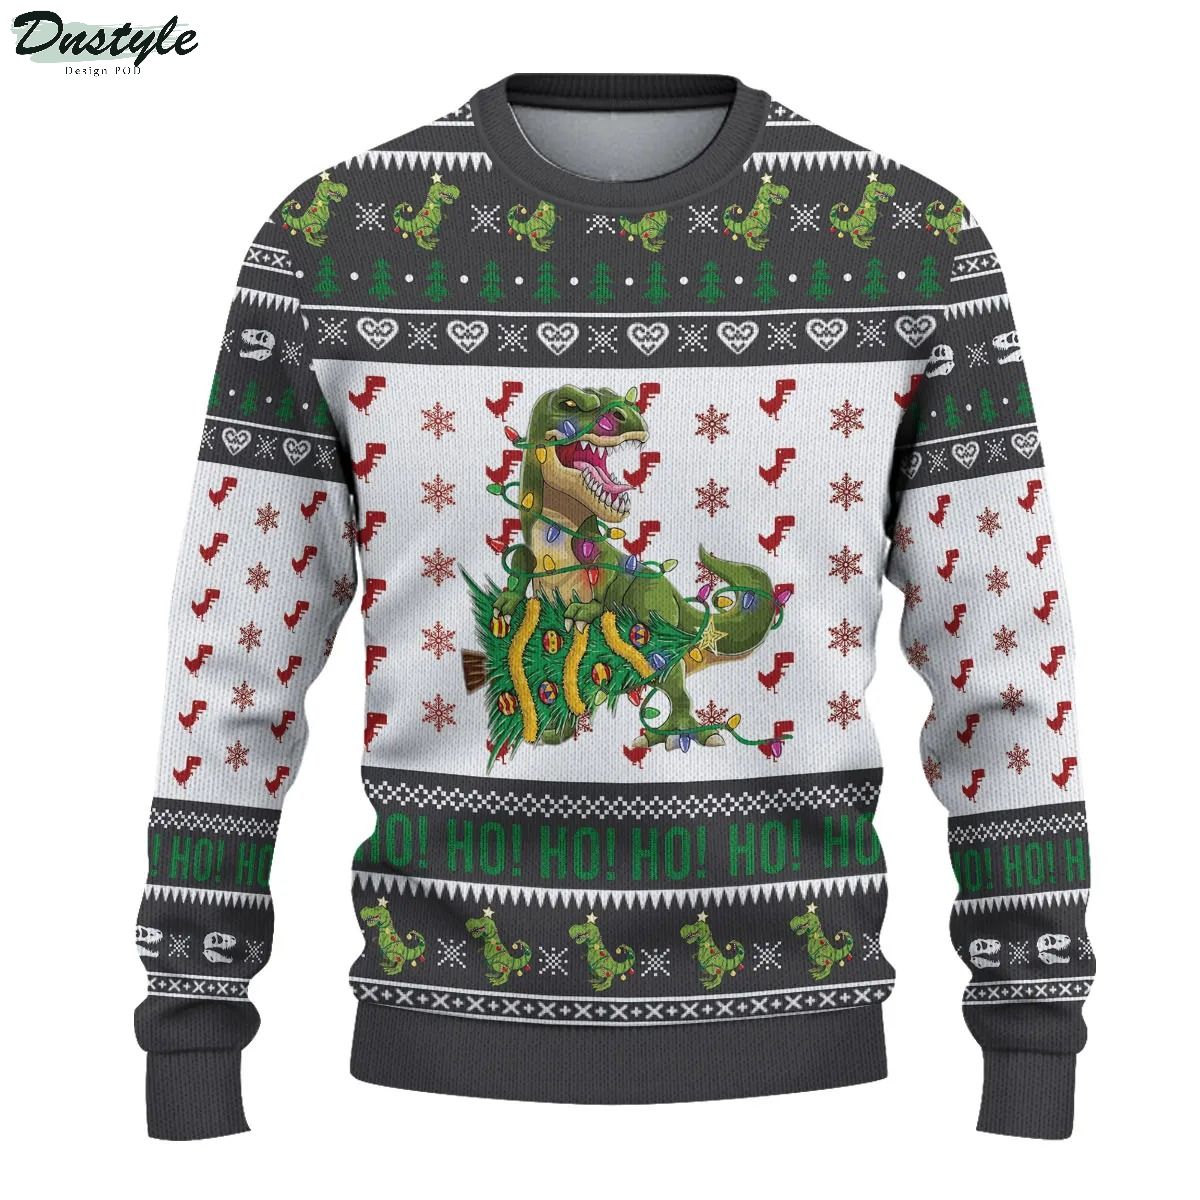 Dinosaur Knitted Ugly Christmas Sweater 2